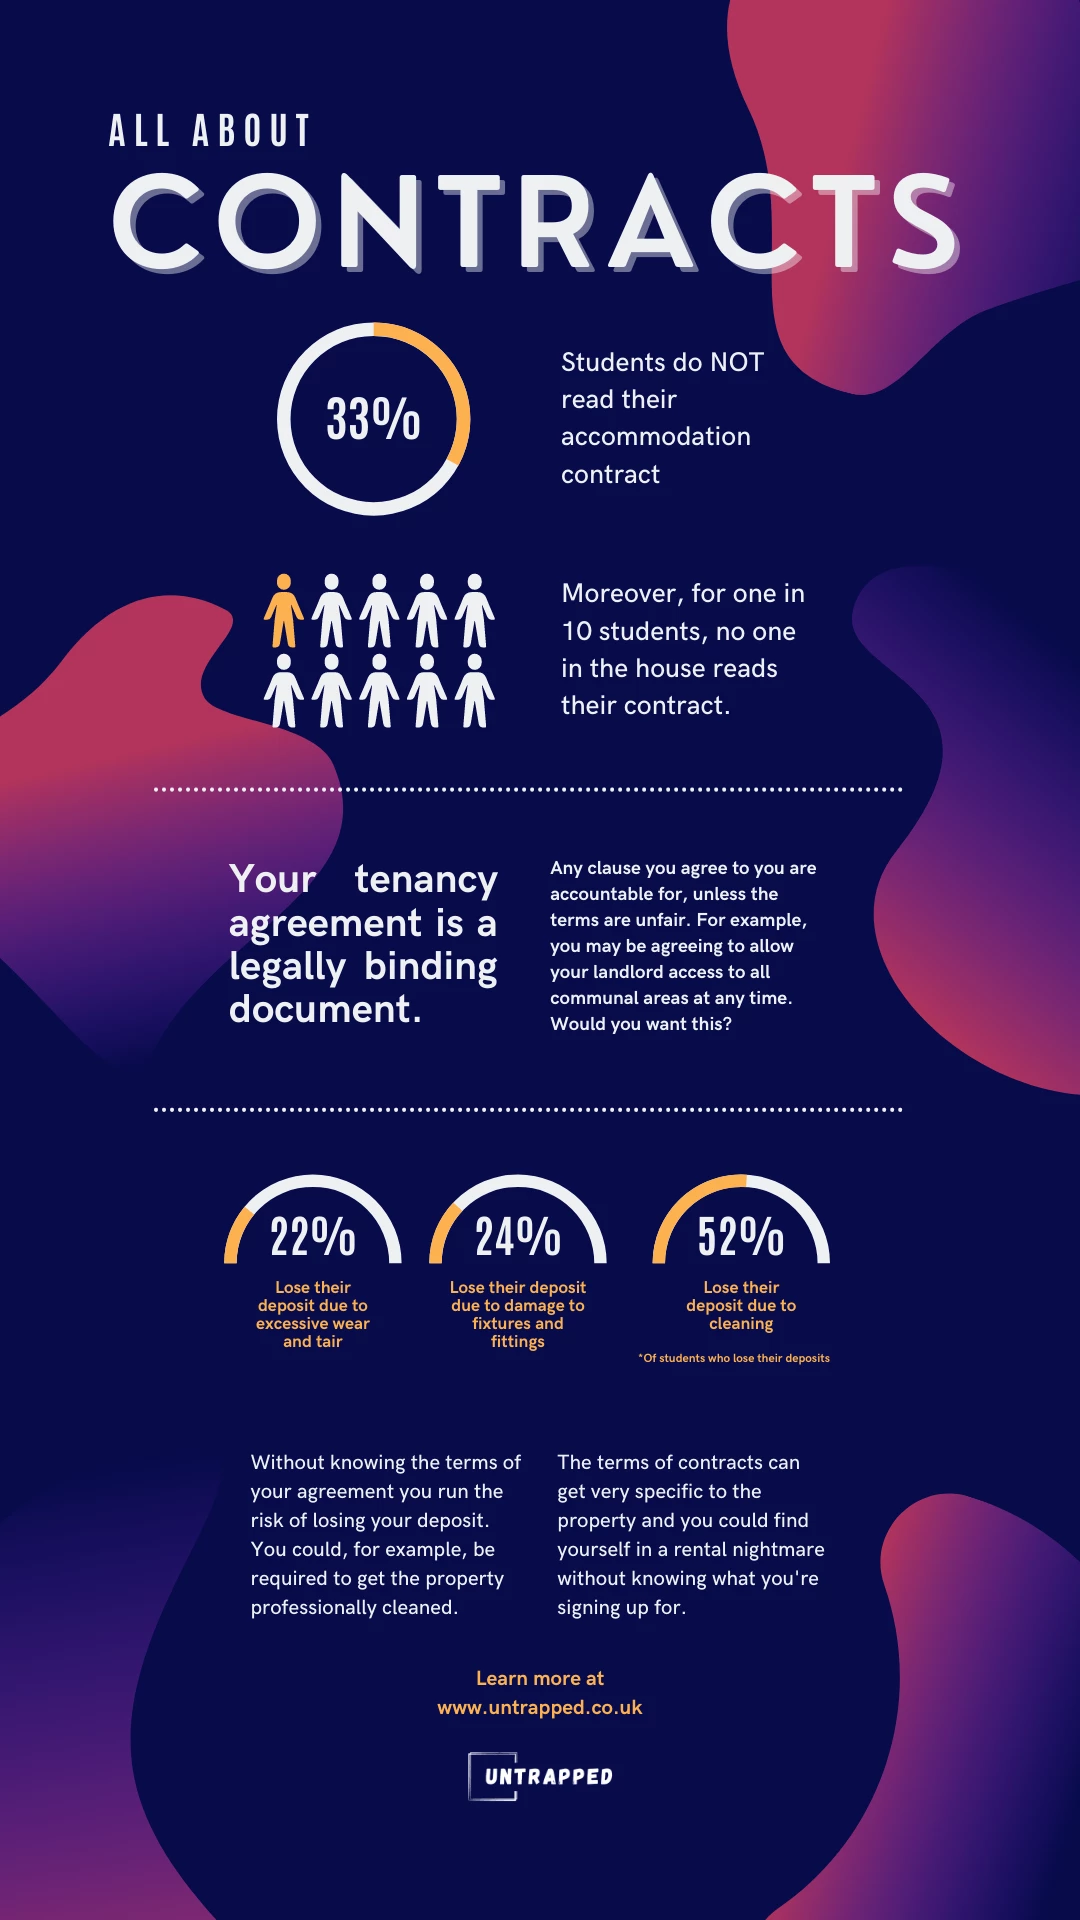 Why You Should Read Your Contract (Infographic)